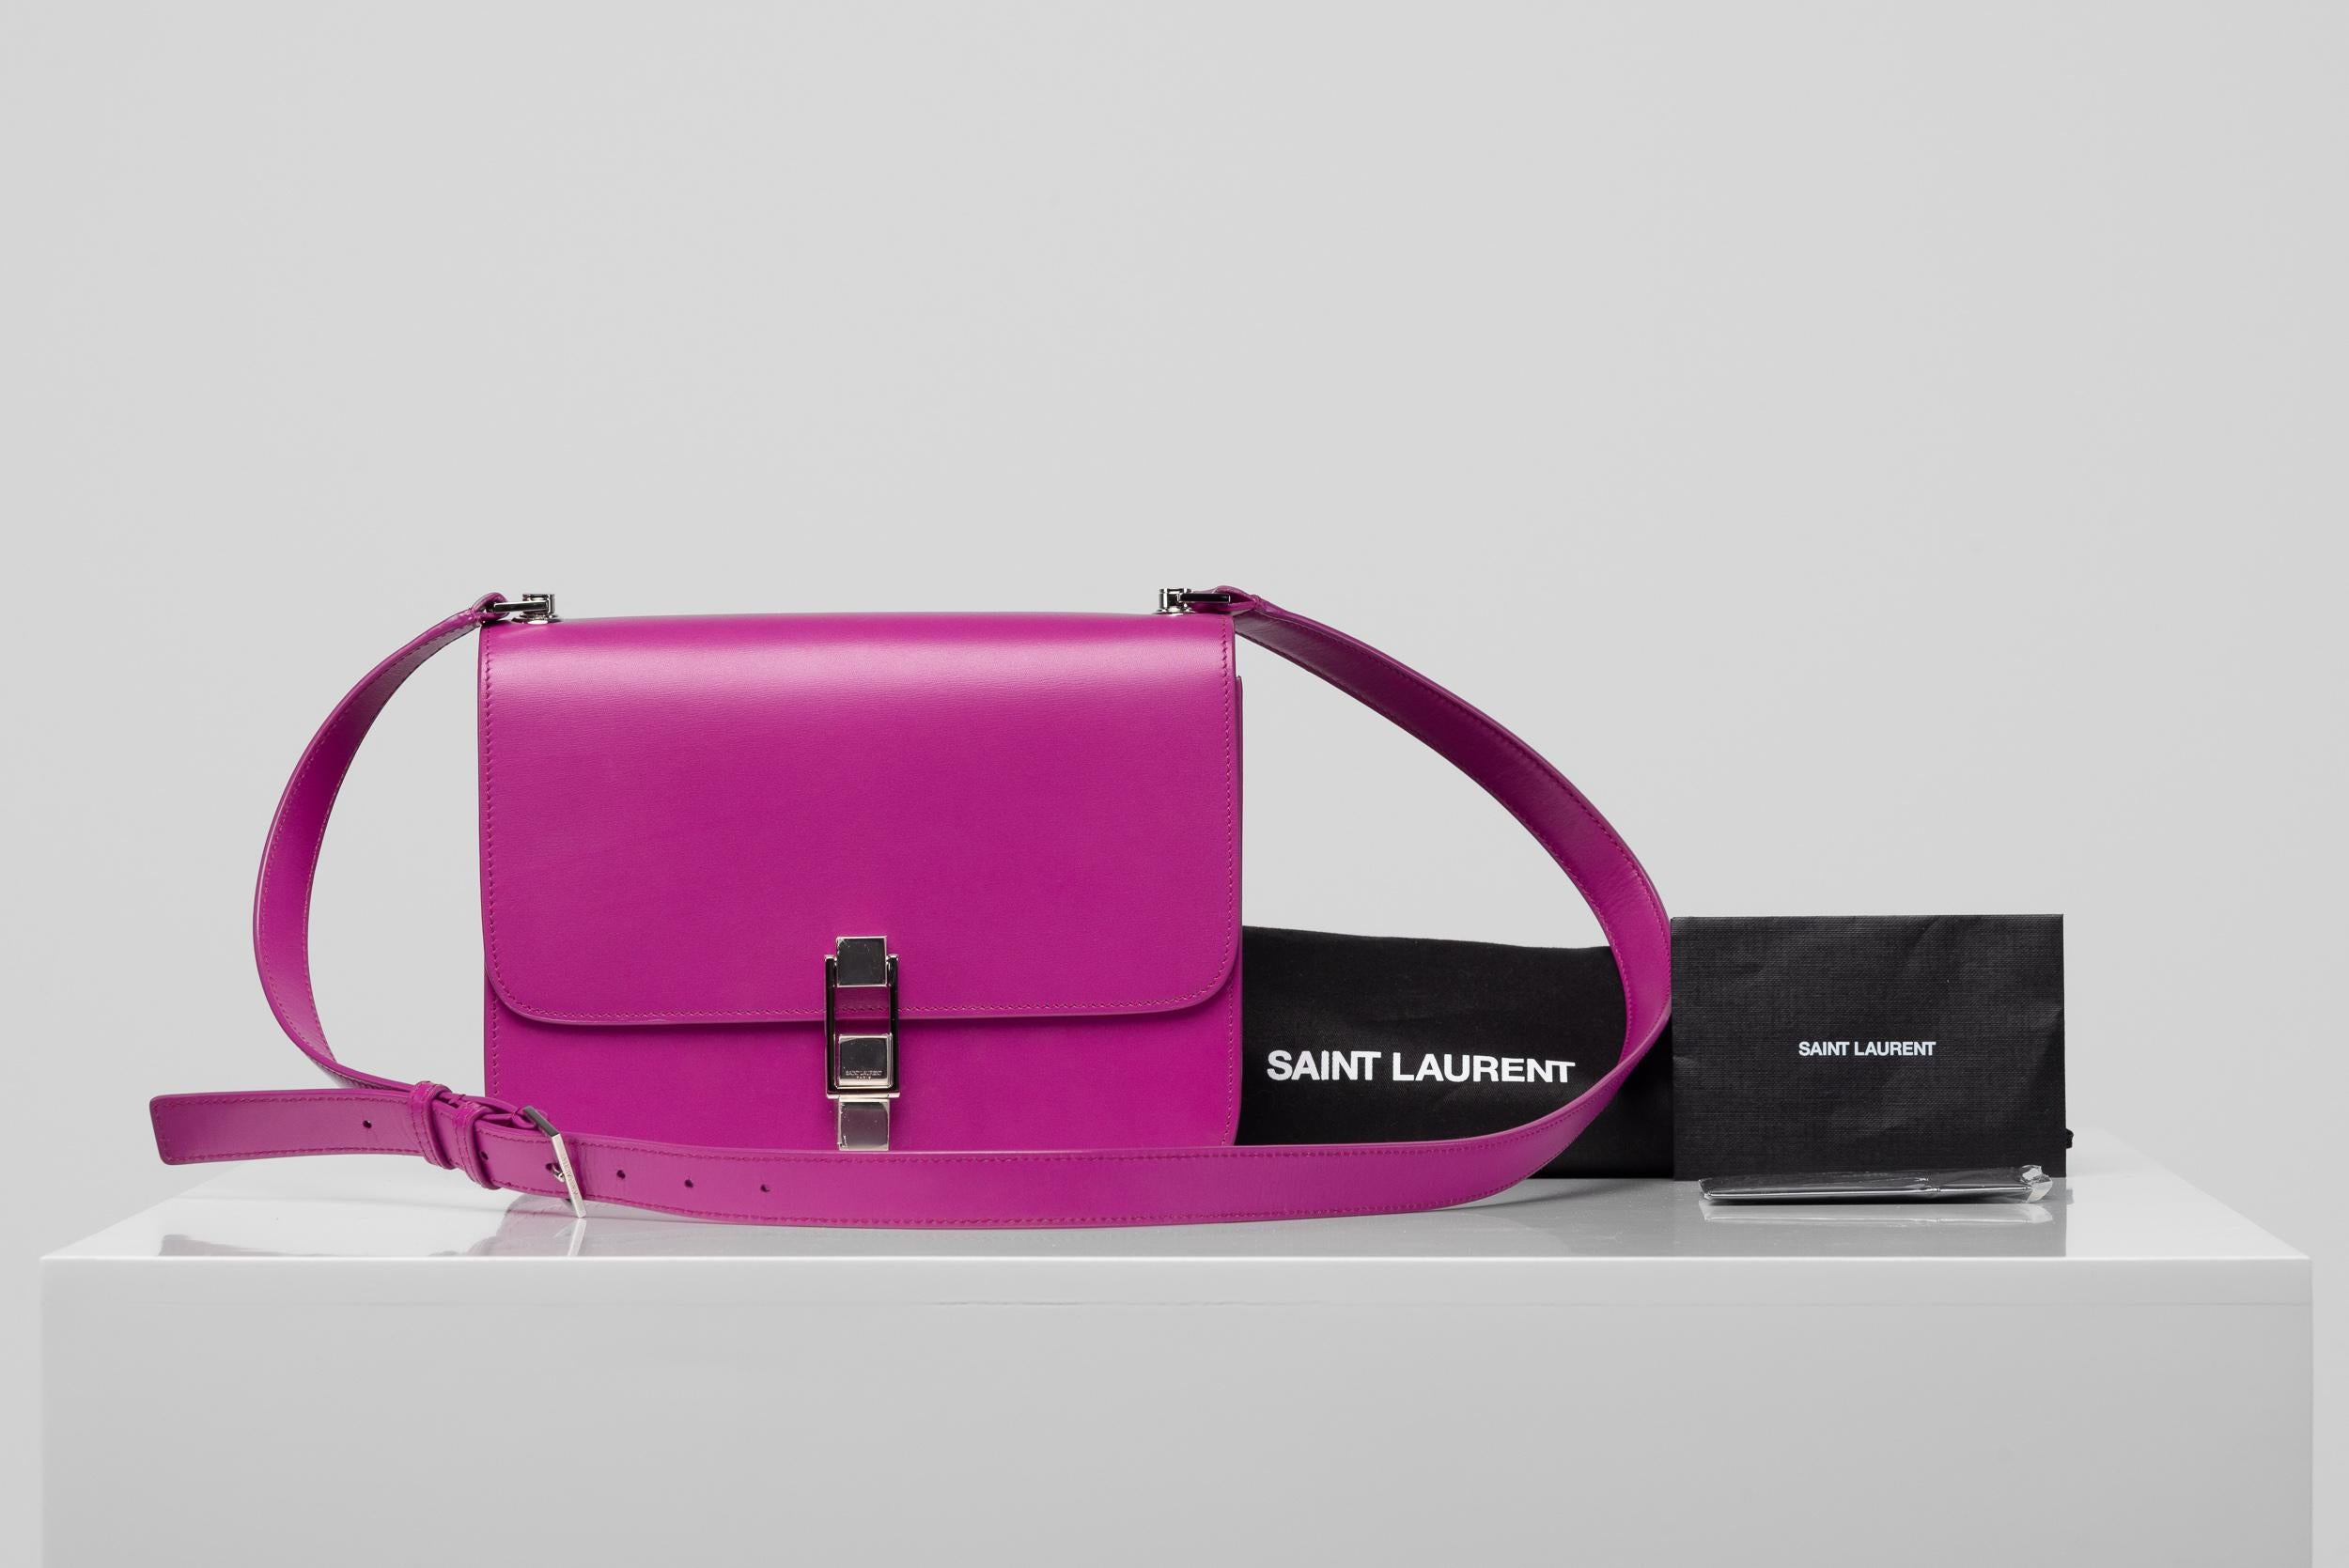 From the collection of SAVINETI we offer this YSL Le Carre Magenta Bag:
- Brand: Yves Saint Laurent
- Model: Classic Flap Medium Caviar
- Year: 2022
- Condition: Very Good (protection foil still on)
- Materials: calfskin leather, silver-toned metal